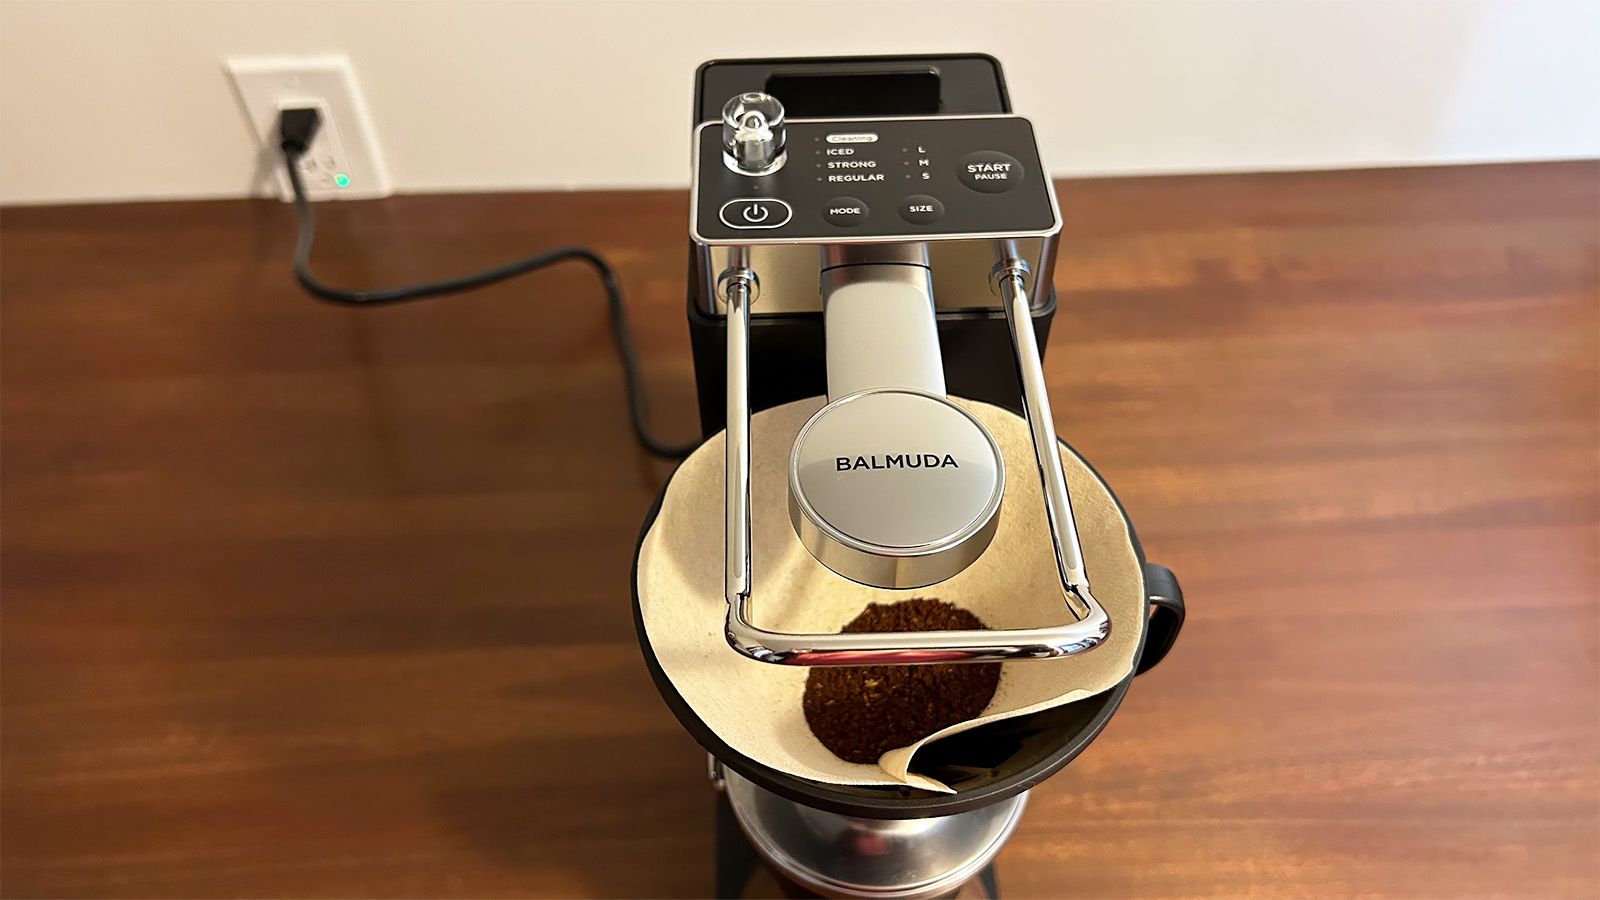 Balmuda The Brew Review: This $700 Coffee Maker Struggles to Make